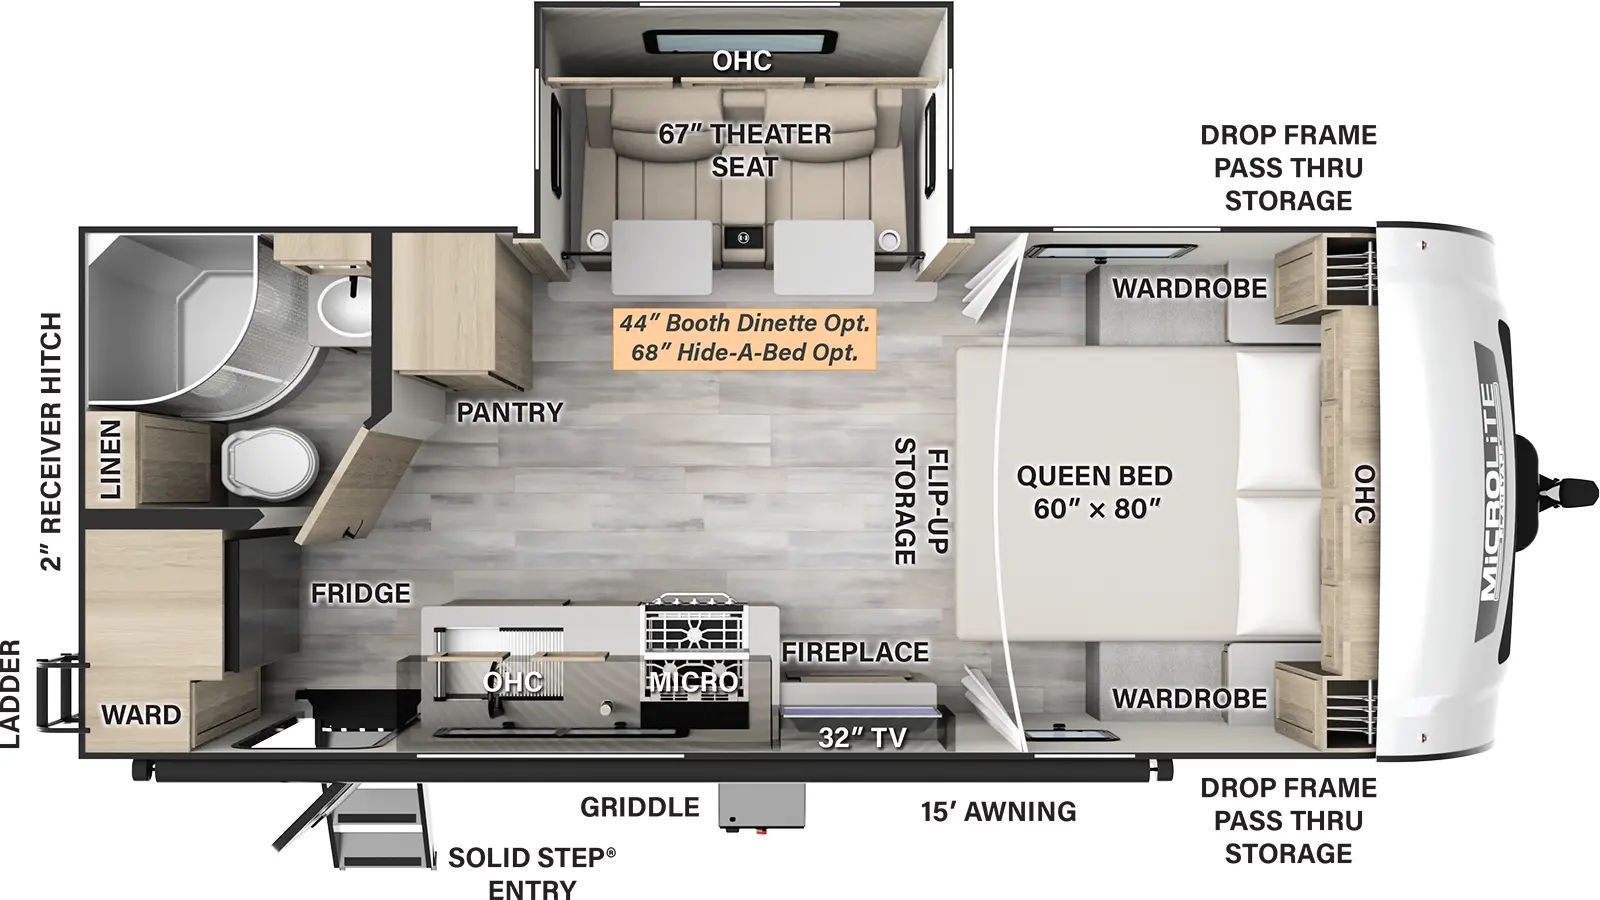 The 22FBS has one slide out and one entry door. Exterior features a 15 foot awning, solid step entry, drop frame front pass thru storage, griddle, rear ladder, and 2 inch receiver hitch. Interior layout front to back: foot-facing queen bed, flip-up storage, overhead cabinets, and wardrobes on either side; off-door side slide out with theater seating with tables and overhead cabinets (booth dinette or hide-a-bed sofa optional); door side TV with fireplace below, countertop with cooktop, overhead cabinets, microwave, sink, and entry; off-door side pantry; rear off-door side full bathroom with linen closet; rear wardrobe and refrigerator.